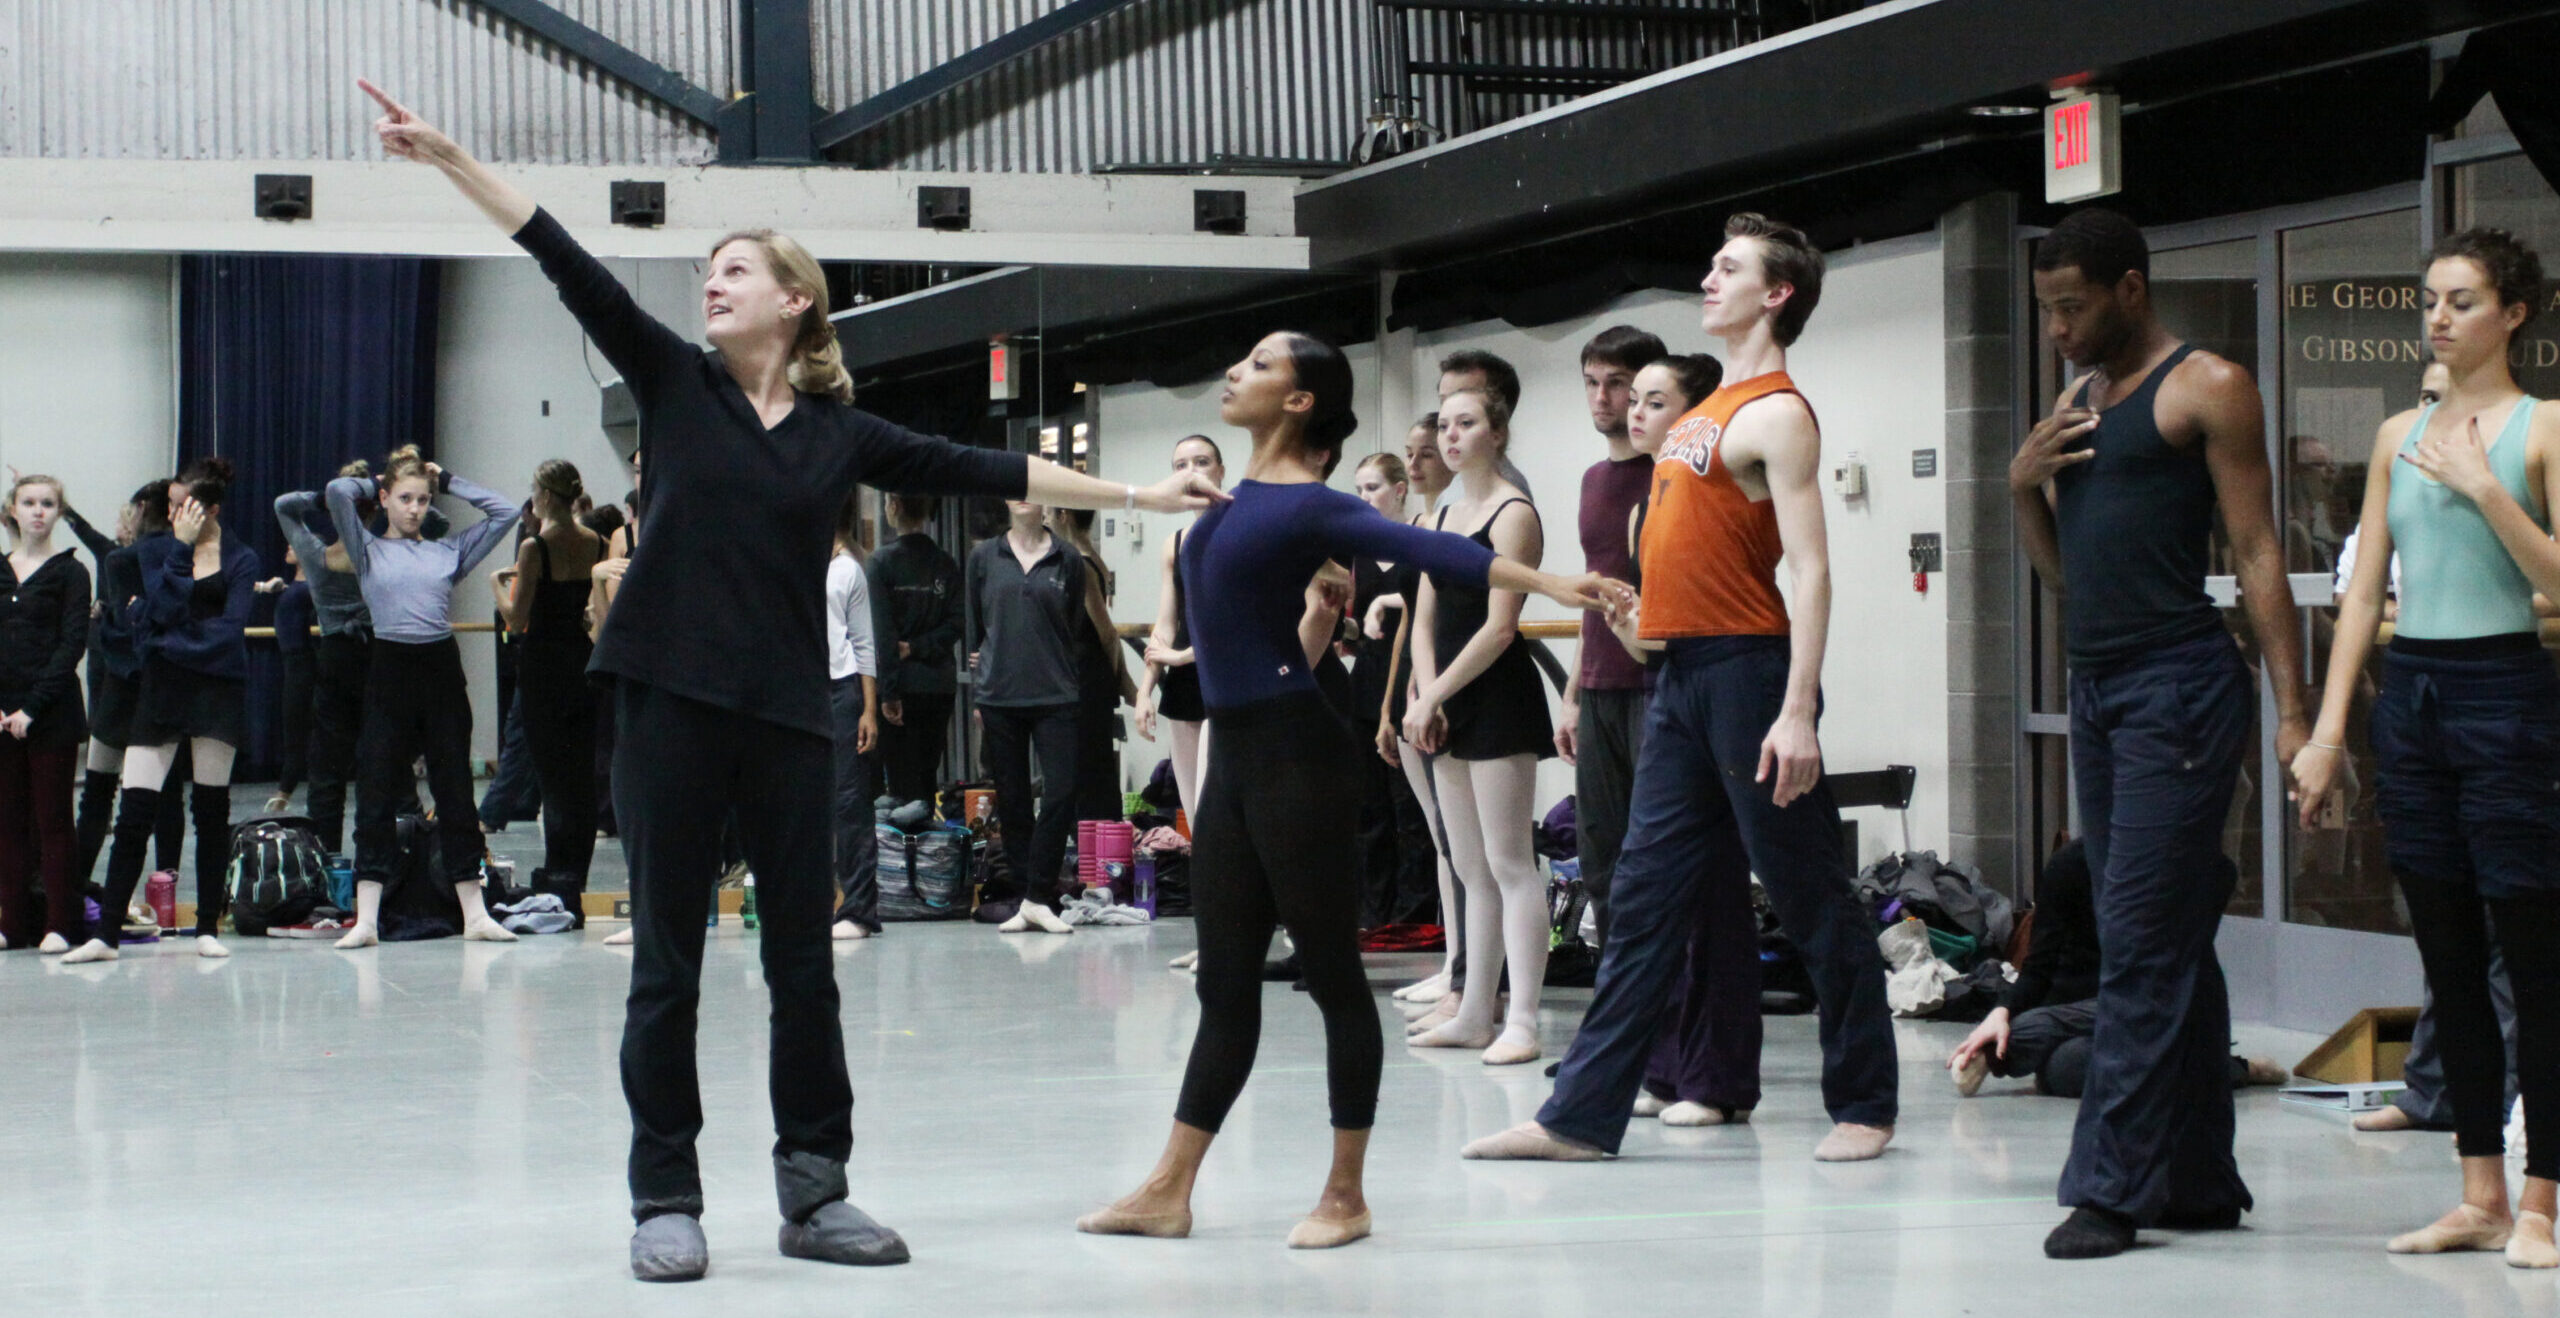 Stoner Winslett demonstrates an open allongé port de bras position in rehearsal with a large group of dancers.